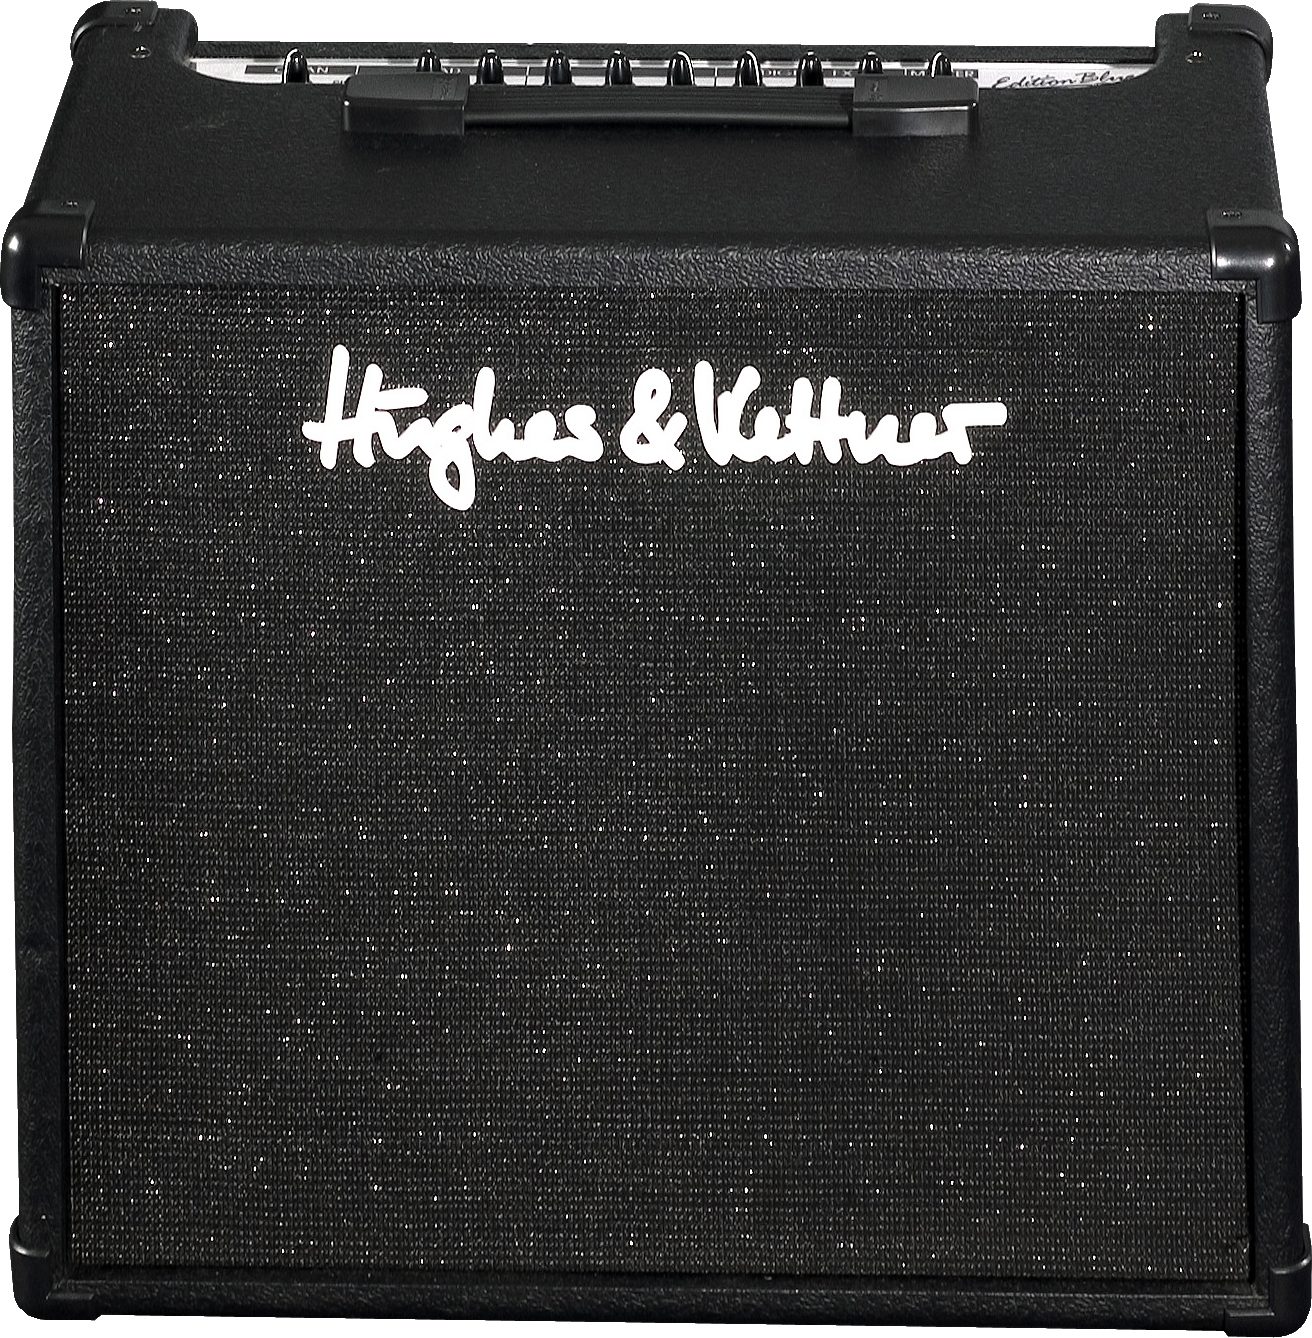 Hughes and Kettner Edition Blue 30 DFX Guitar Combo Amplifier 